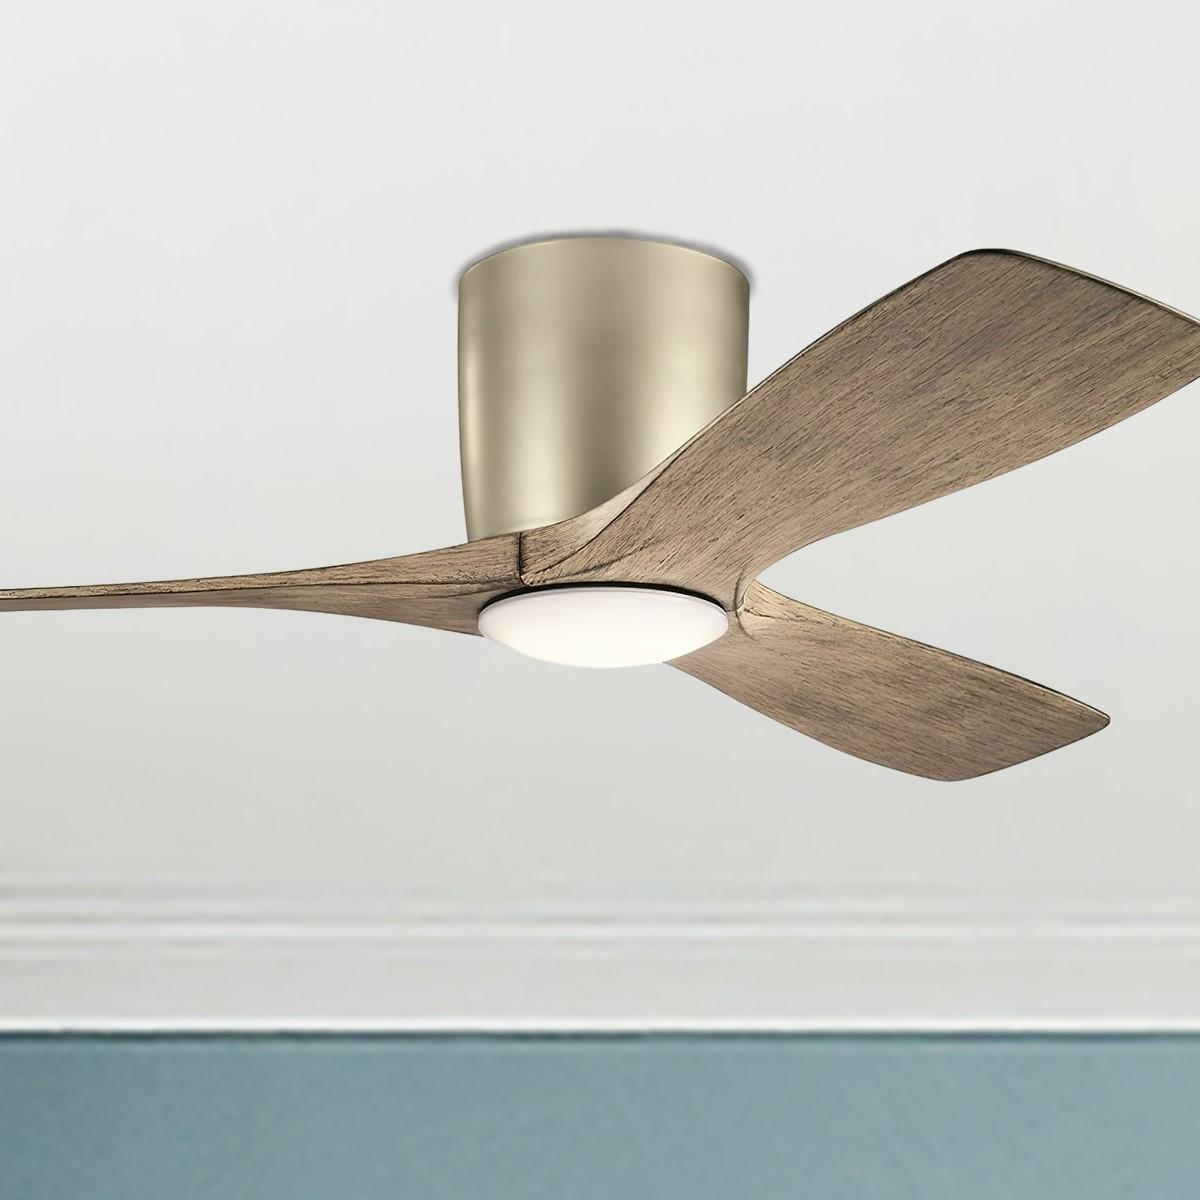 Volos 48 Inch Contemporary Ceiling Fan With Light, Wall Control Included